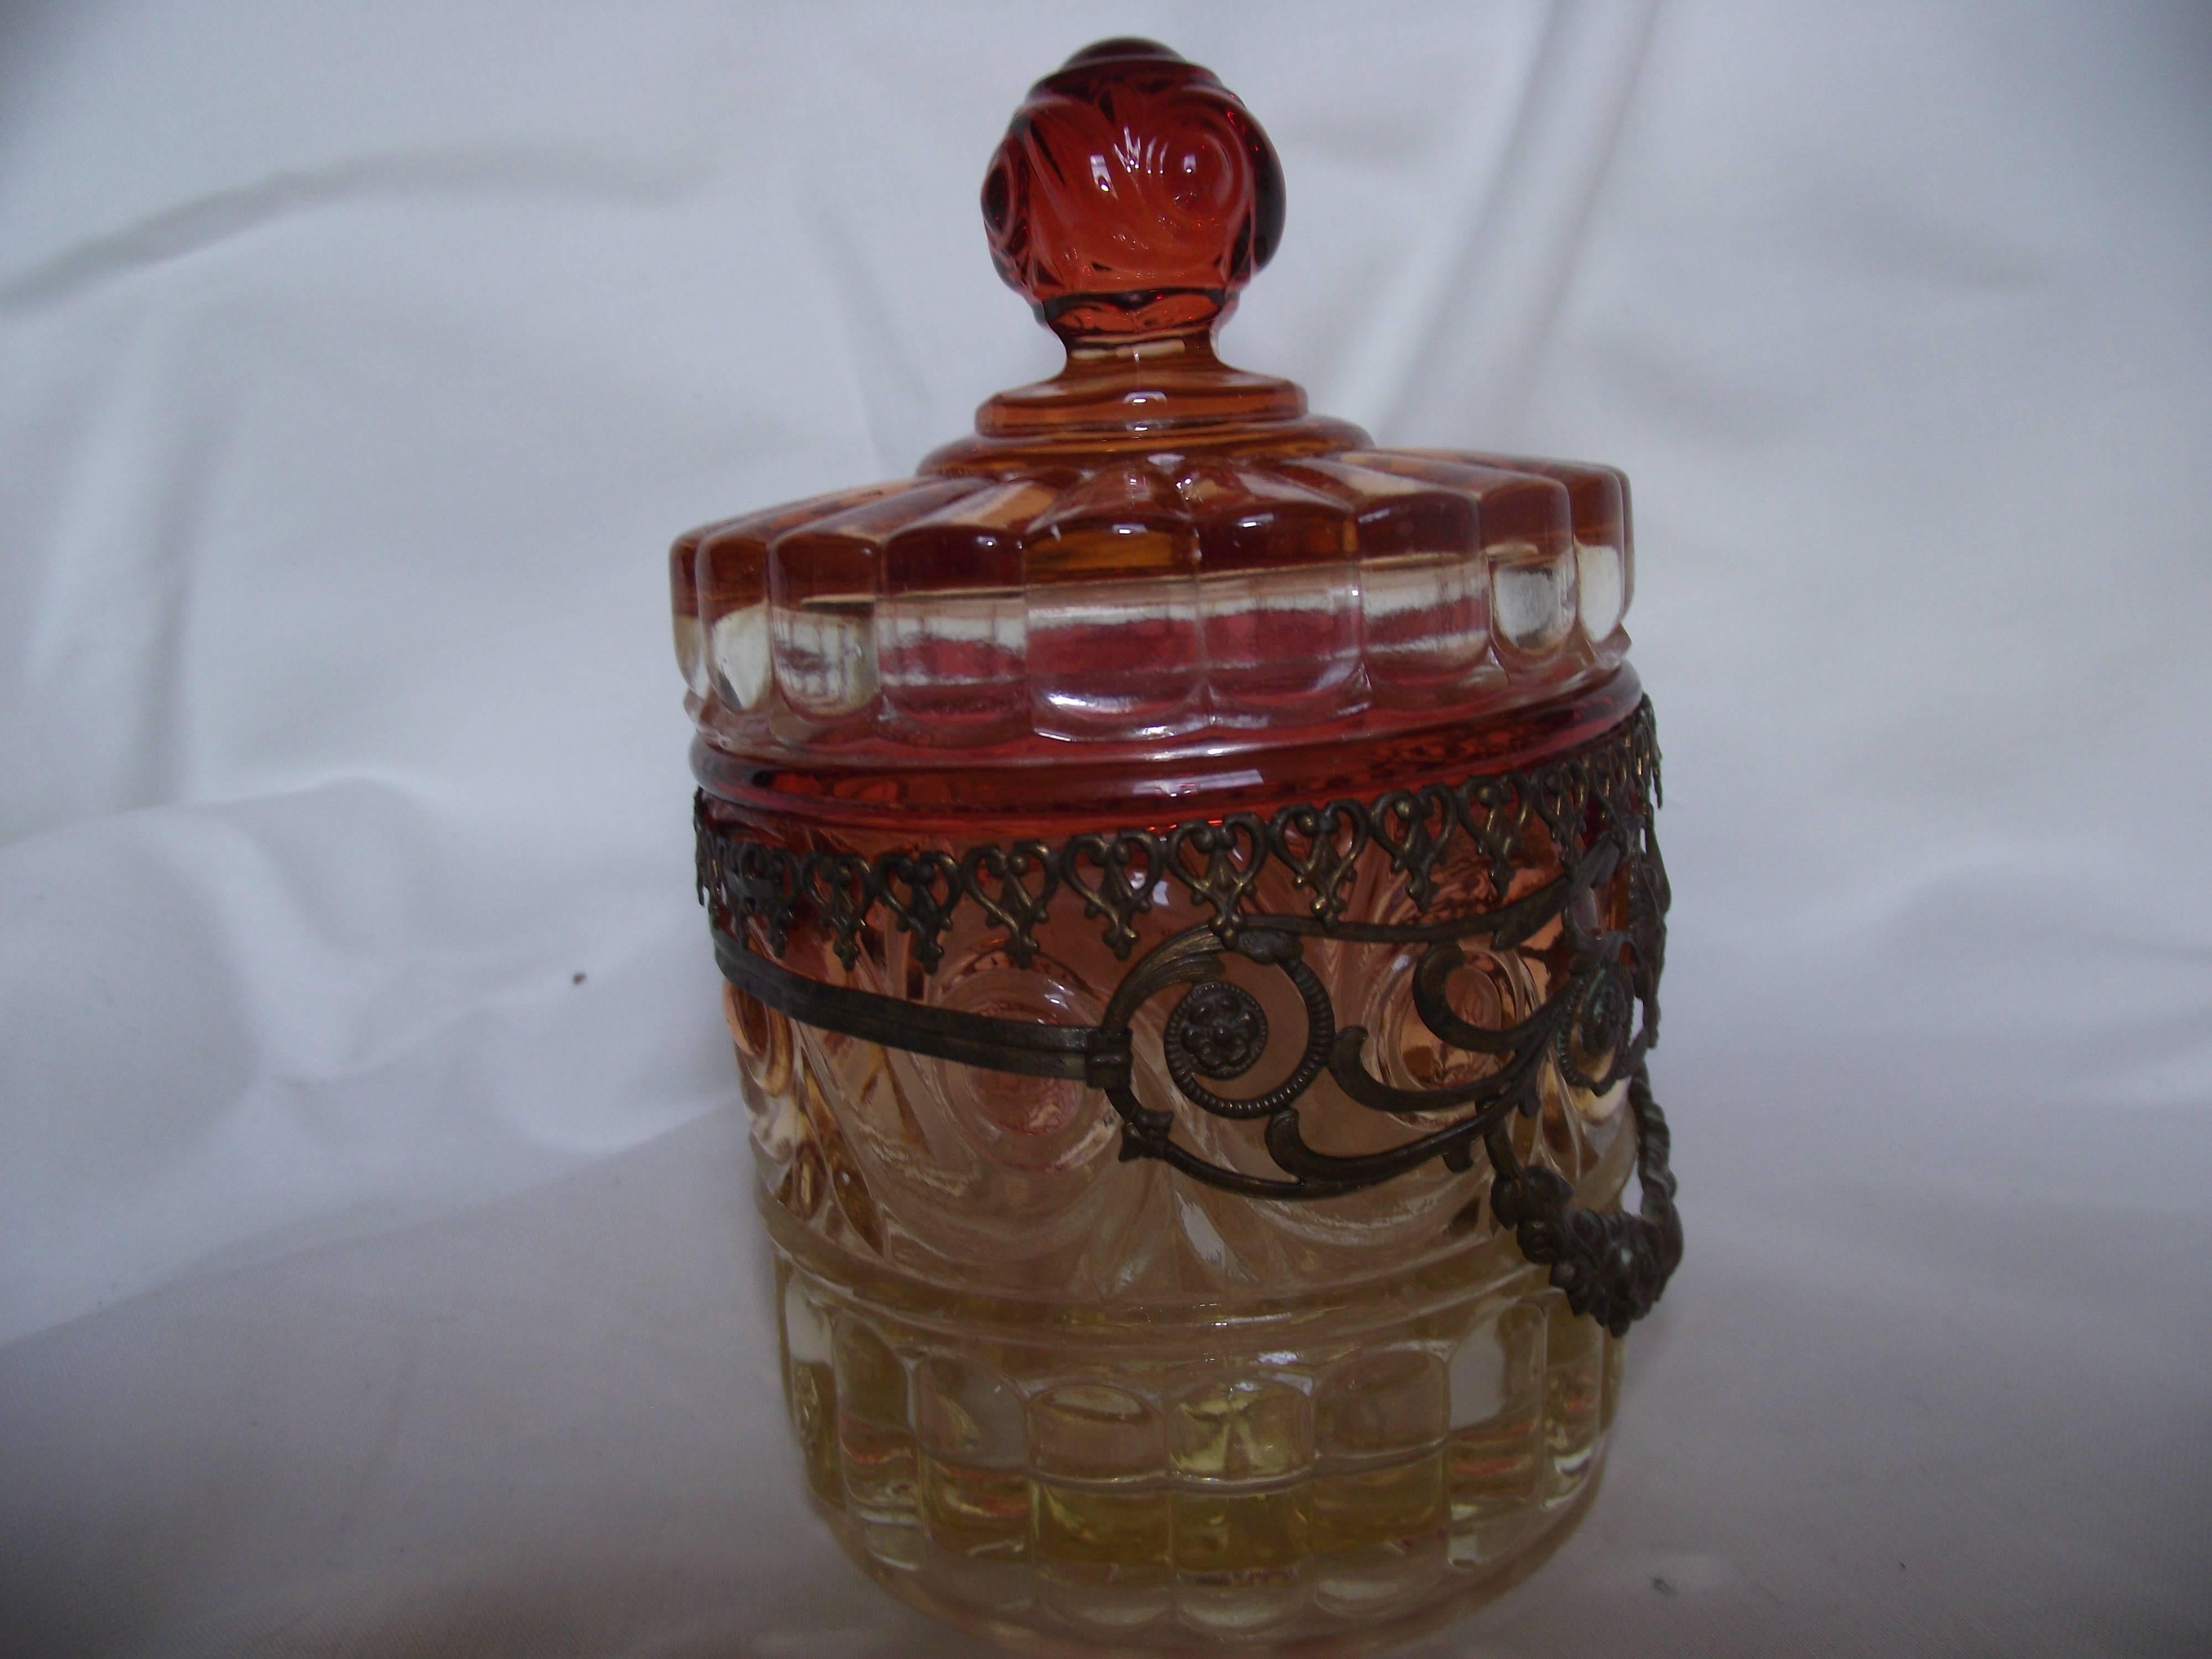 This little jar is known as Baccarat's Amberina Rose Tiente(tint). This pattern was made originally in 1916, discontinued during the war and reintroduced in 1940. The color tints were produced by adding a small amount of gold to the clear glass